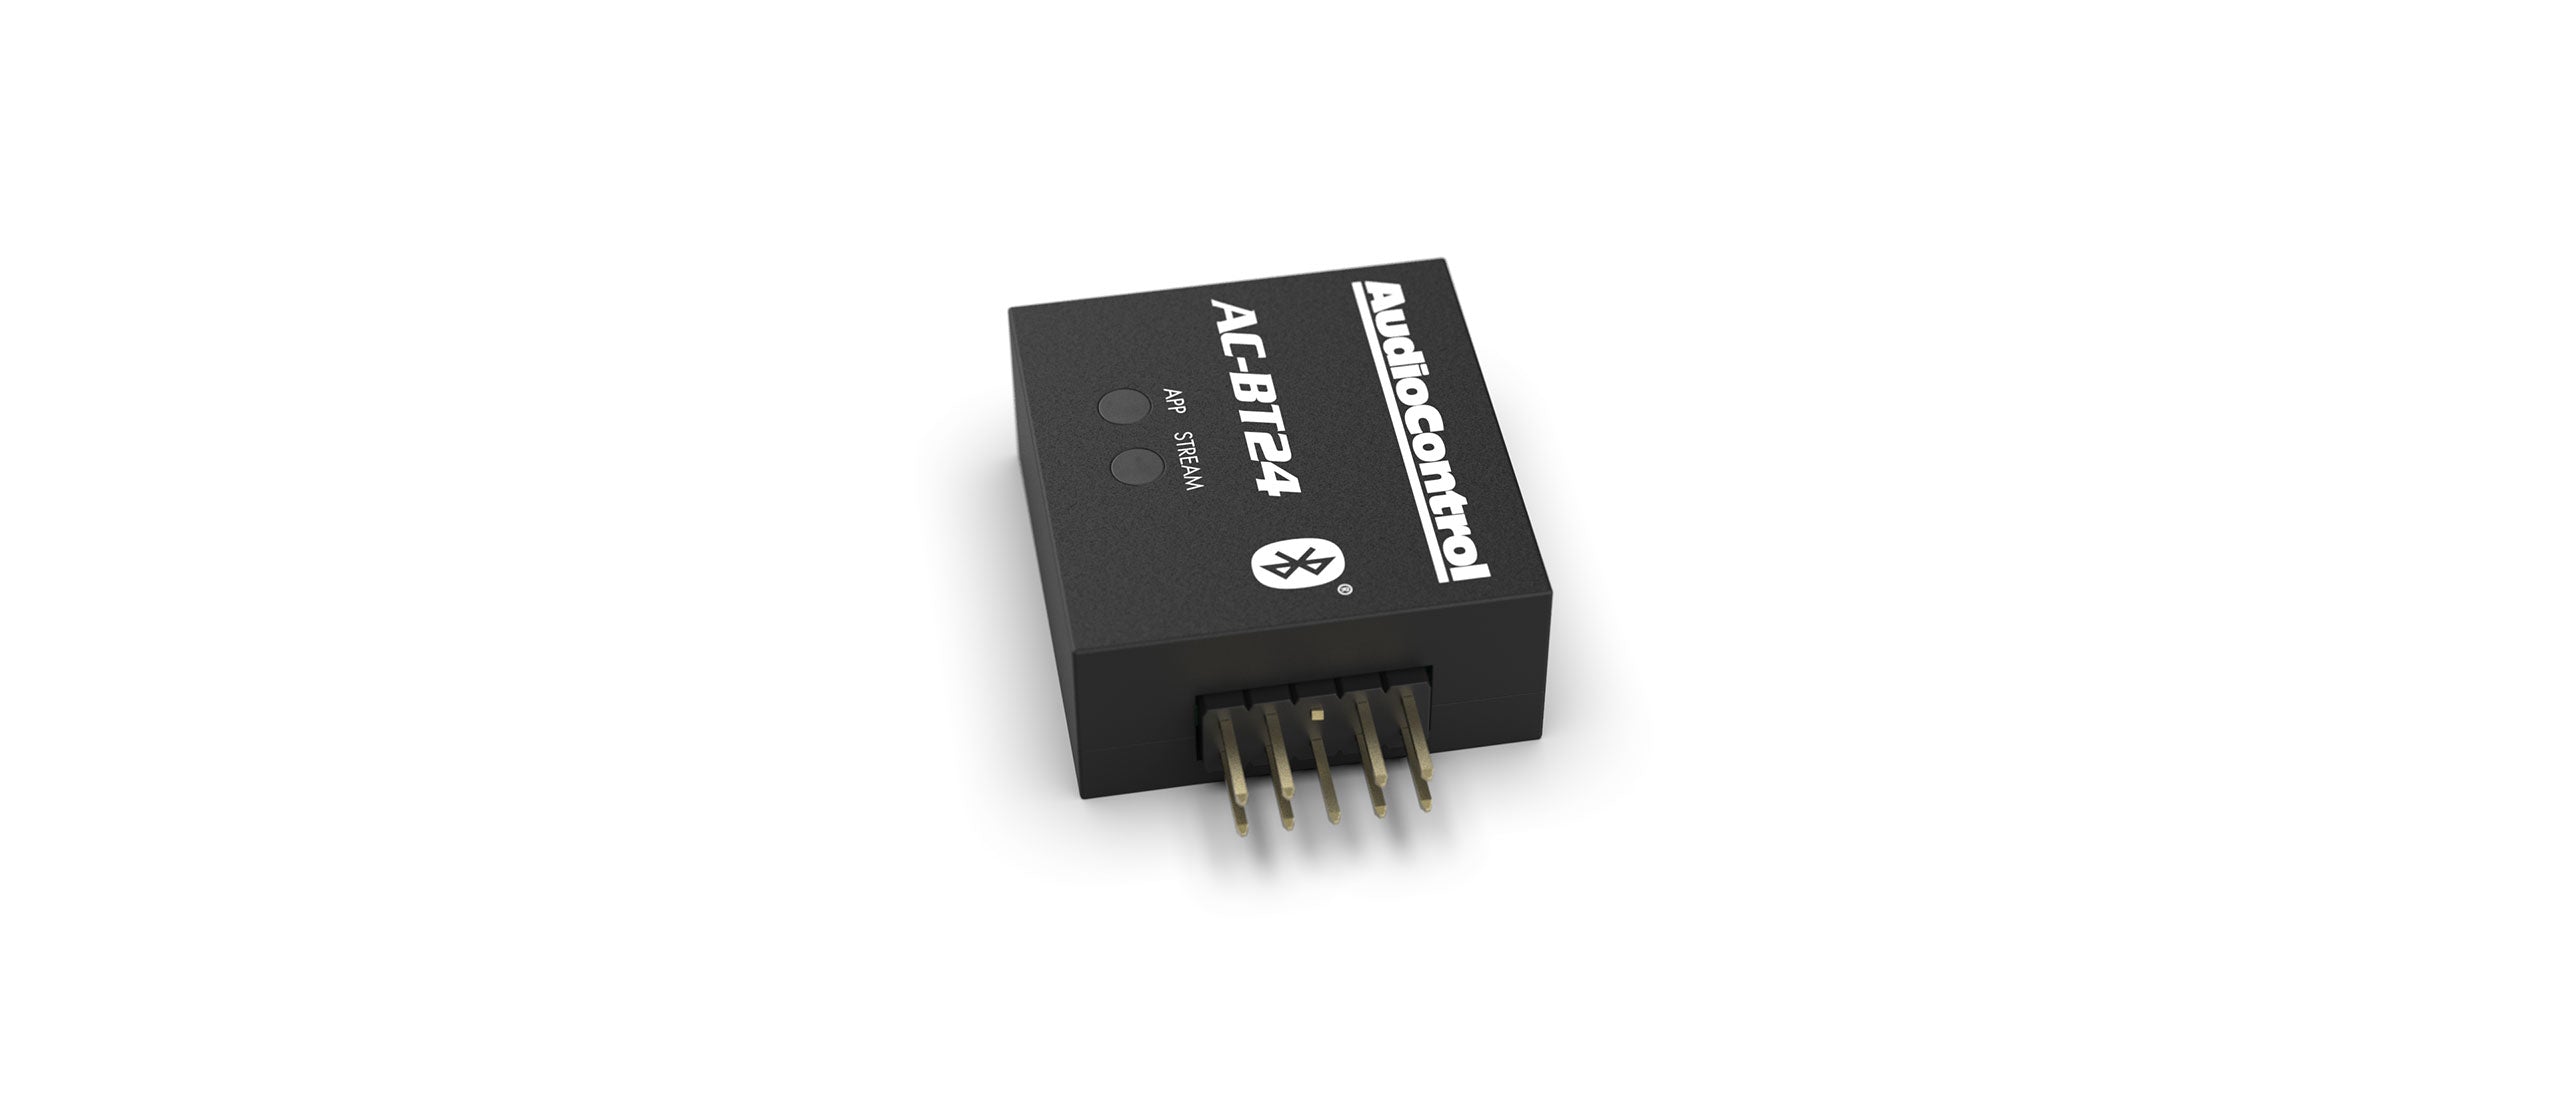 AC-BT24 | BLUETOOTH ADAPTER FOR AUDIO CONTROL DSP'S